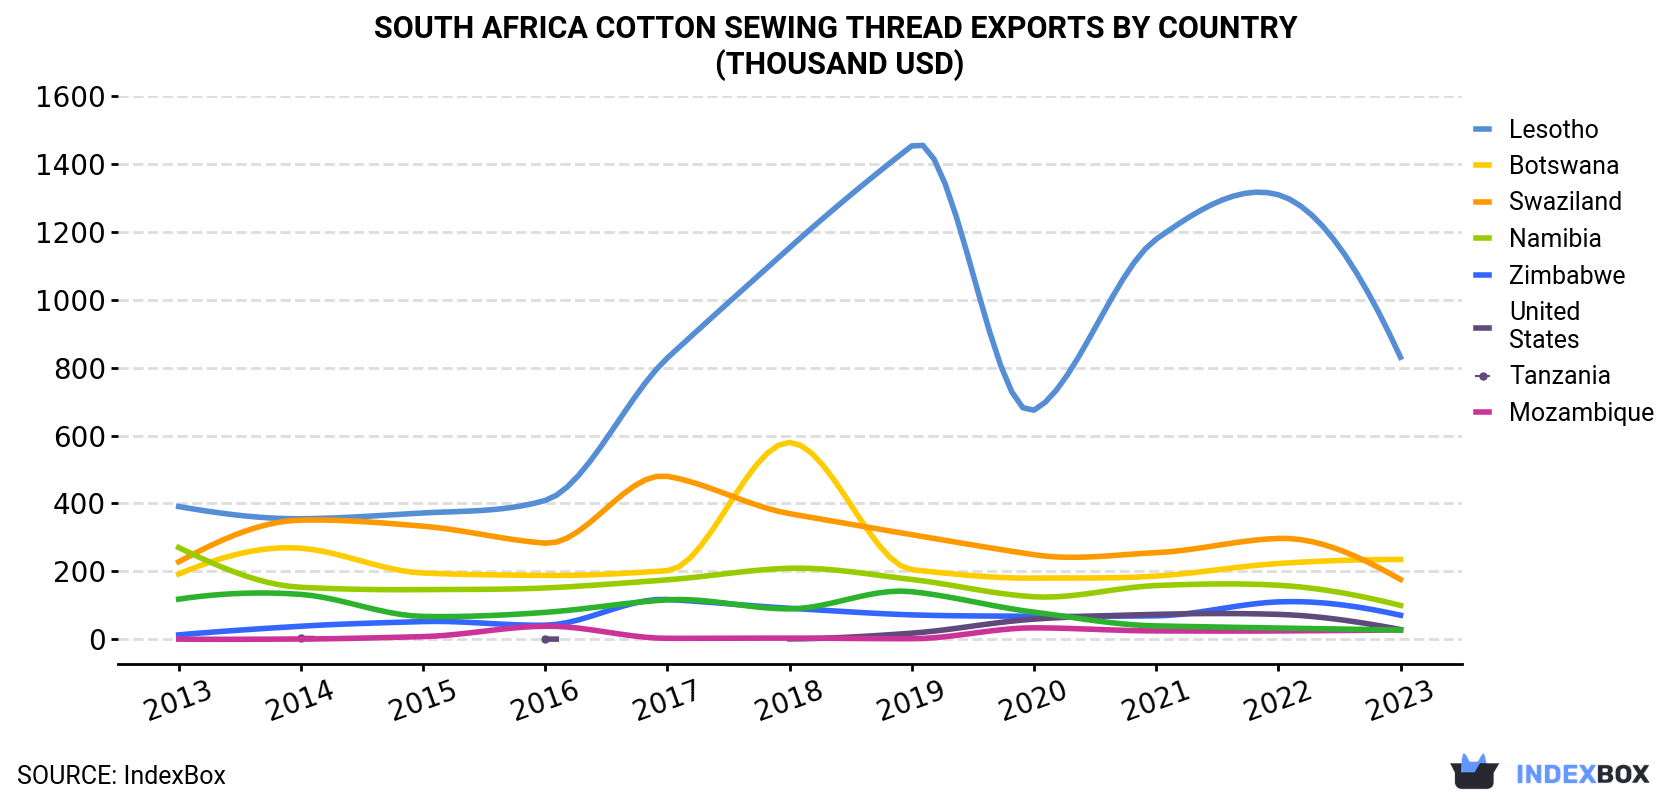 South Africa Cotton Sewing Thread Exports By Country (Thousand USD)